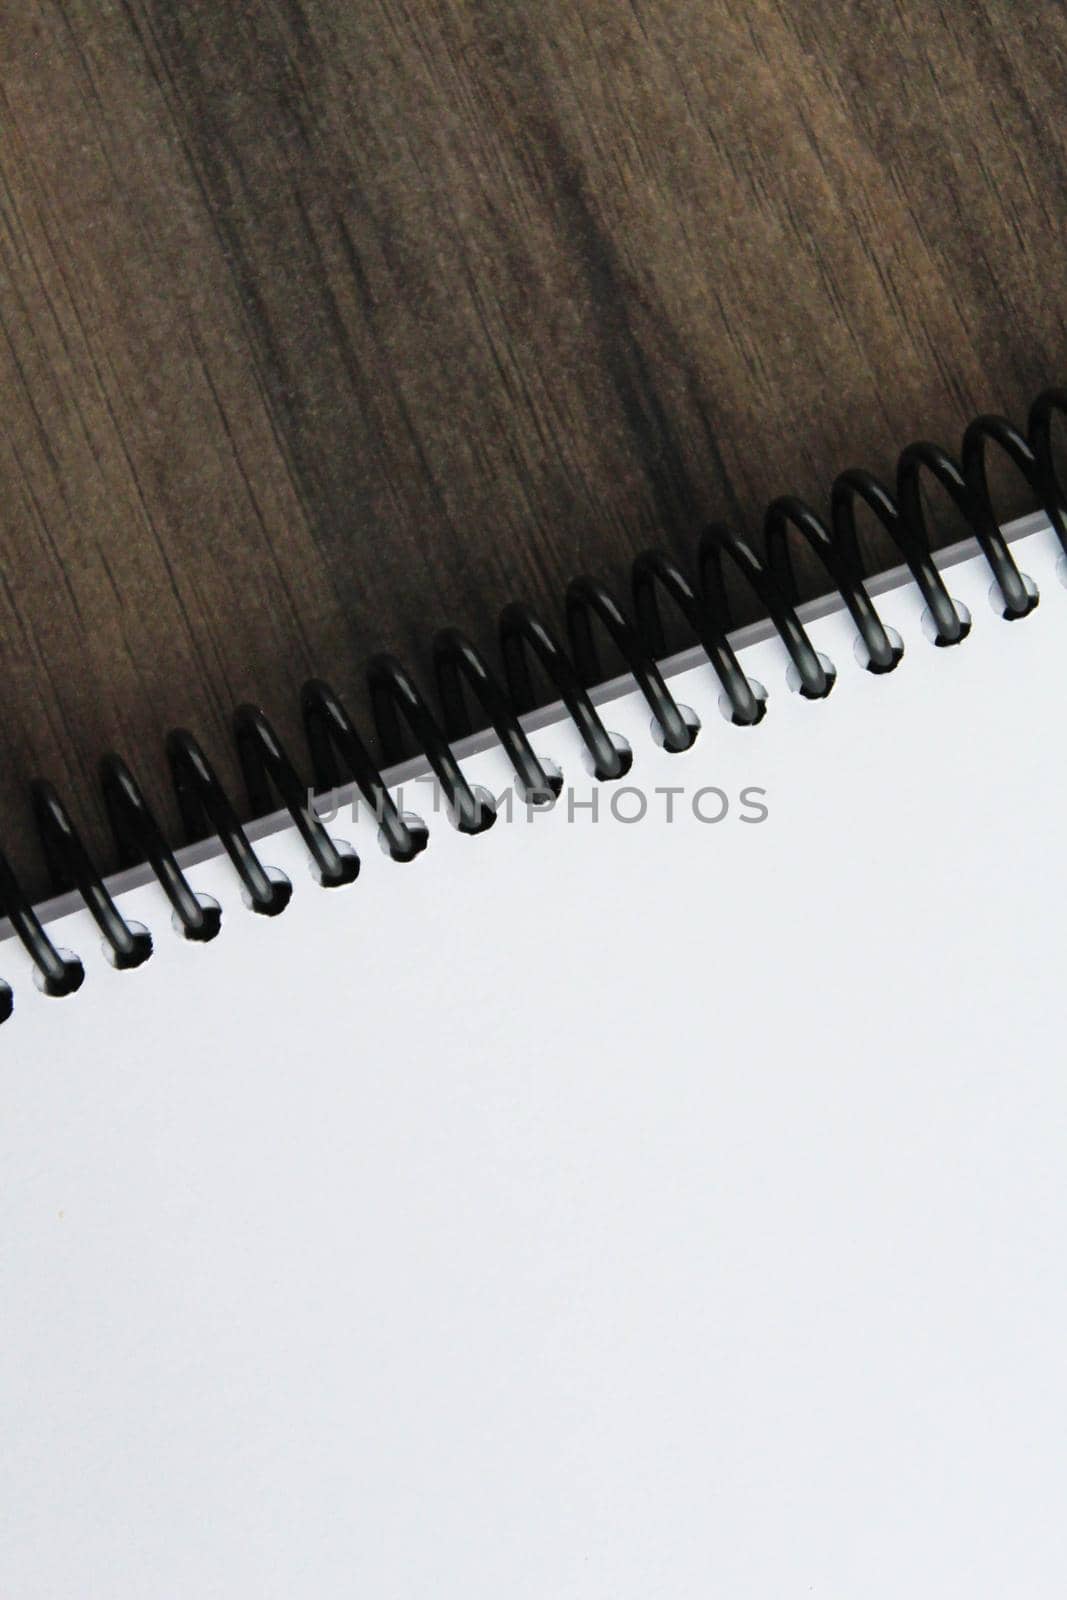 Spiral notepad paper on the wooden background by JuliaDorian